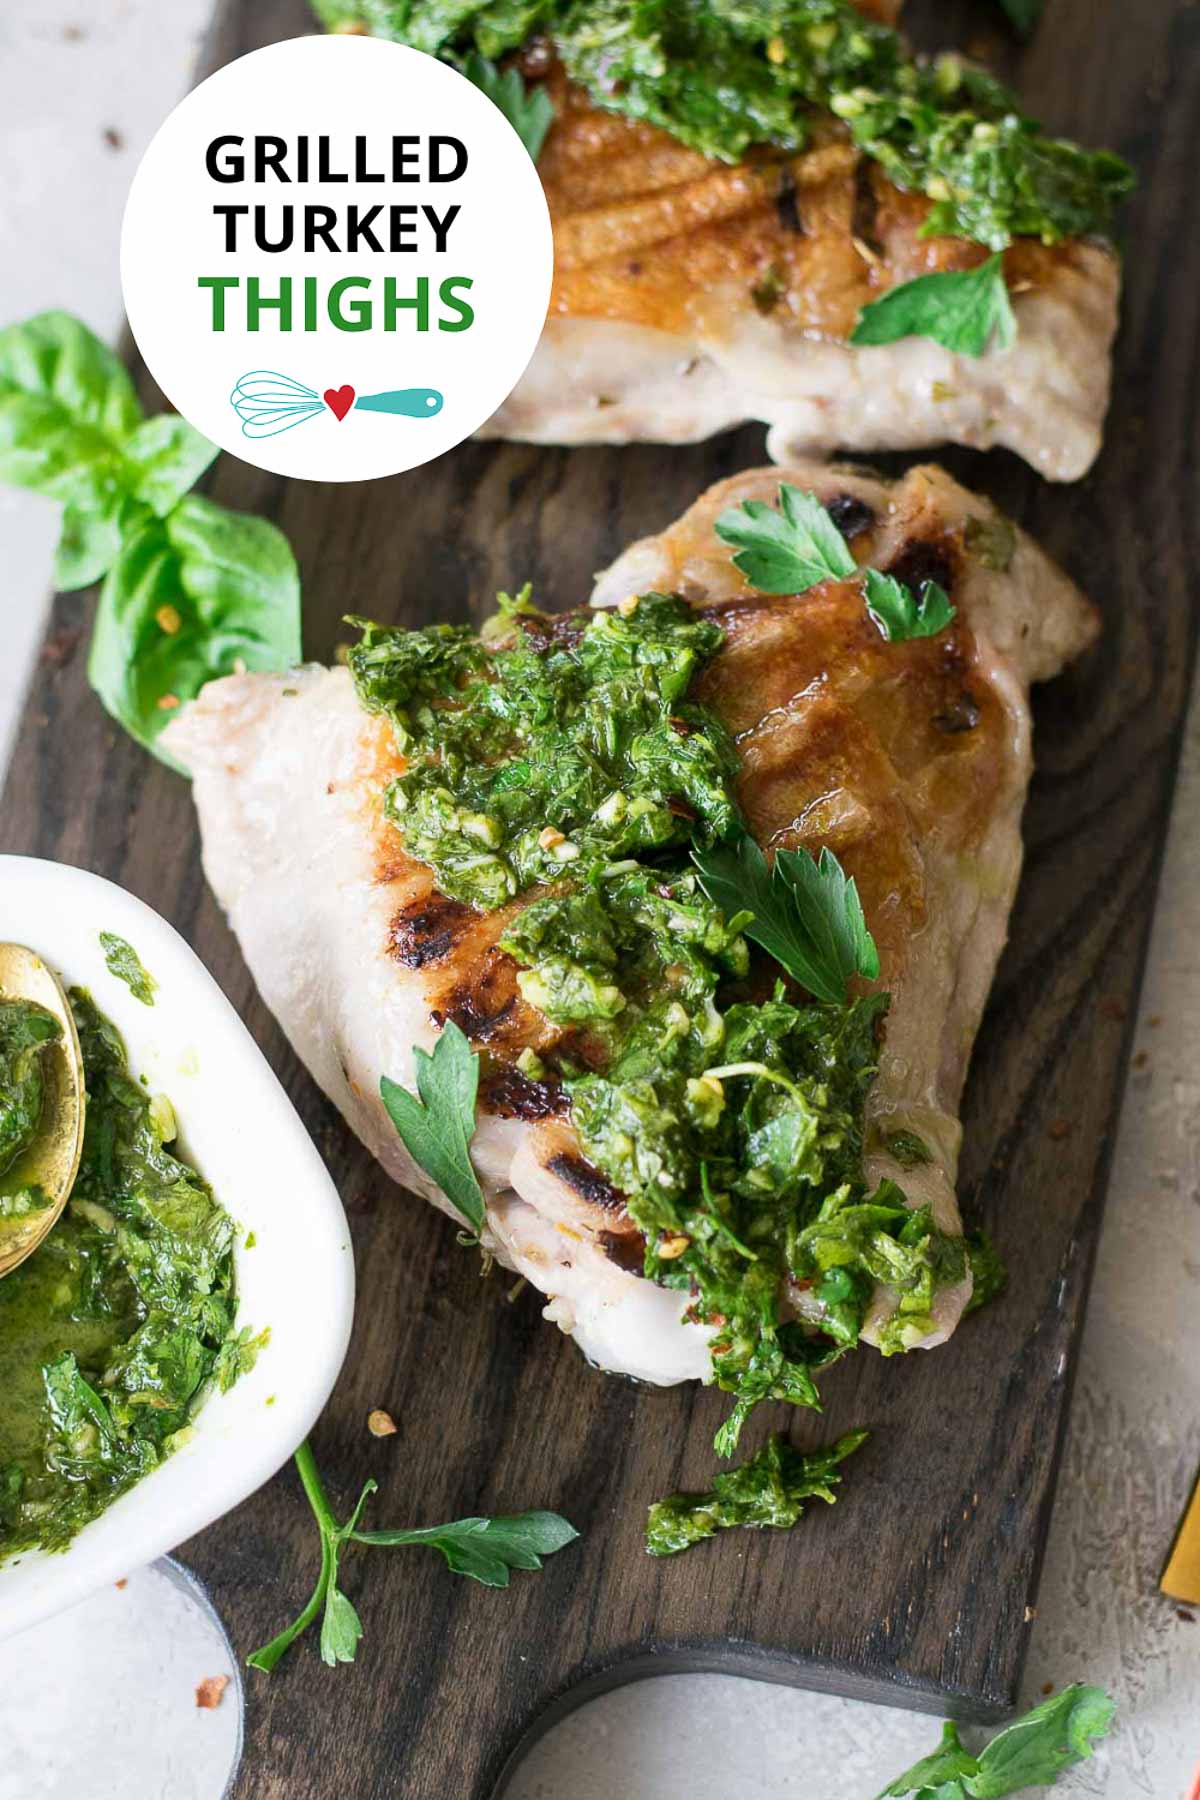 Grilled Turkey Thighs with Chimichurri